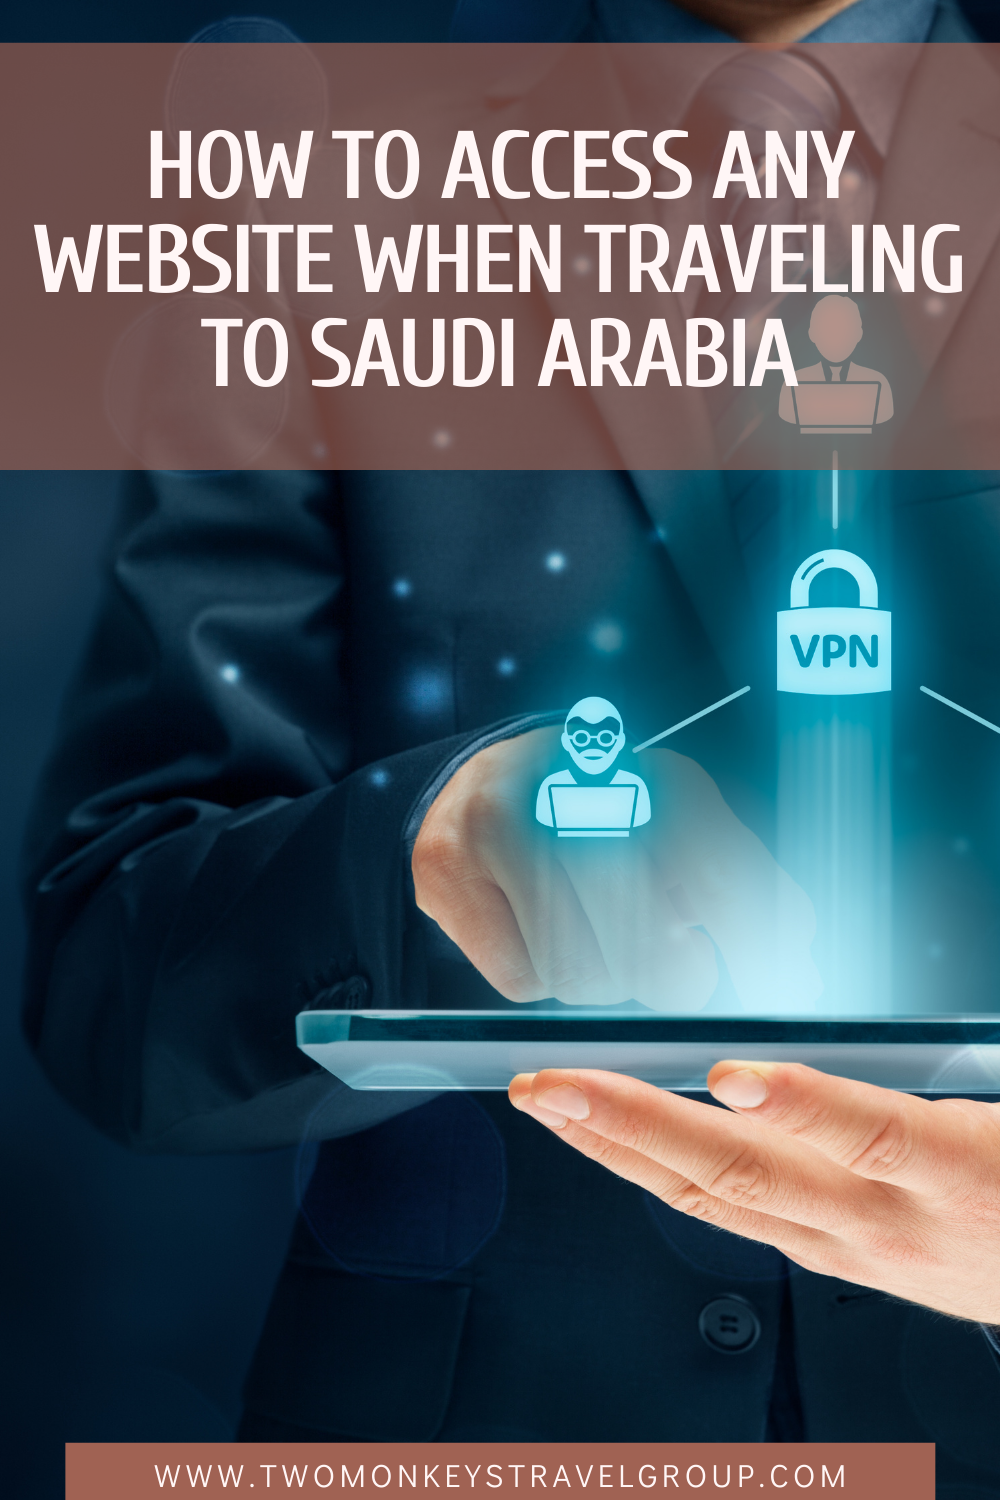 How to Access any Website When Traveling to Saudi Arabia